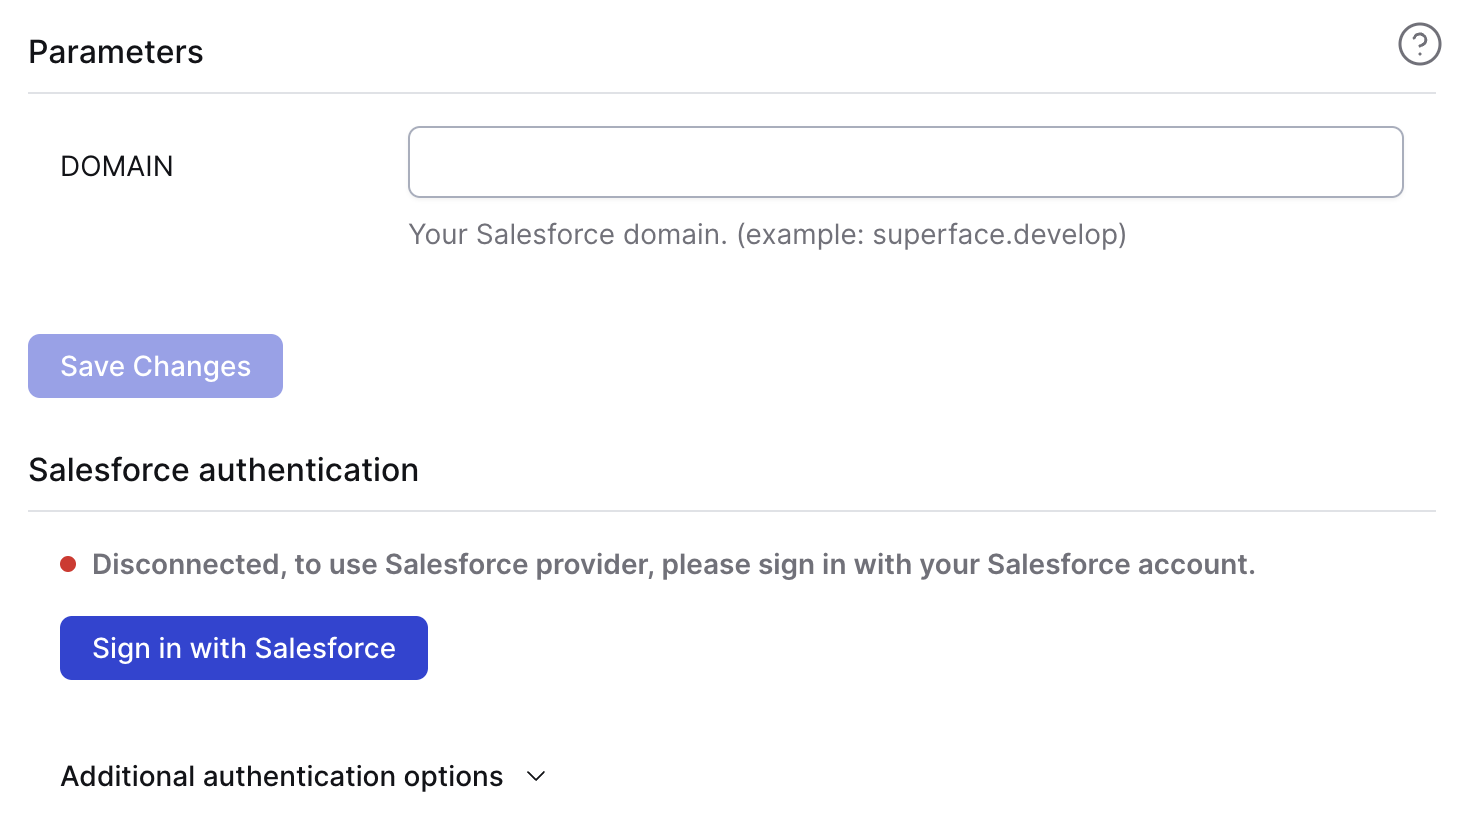 The Salesforce authentication in Superface